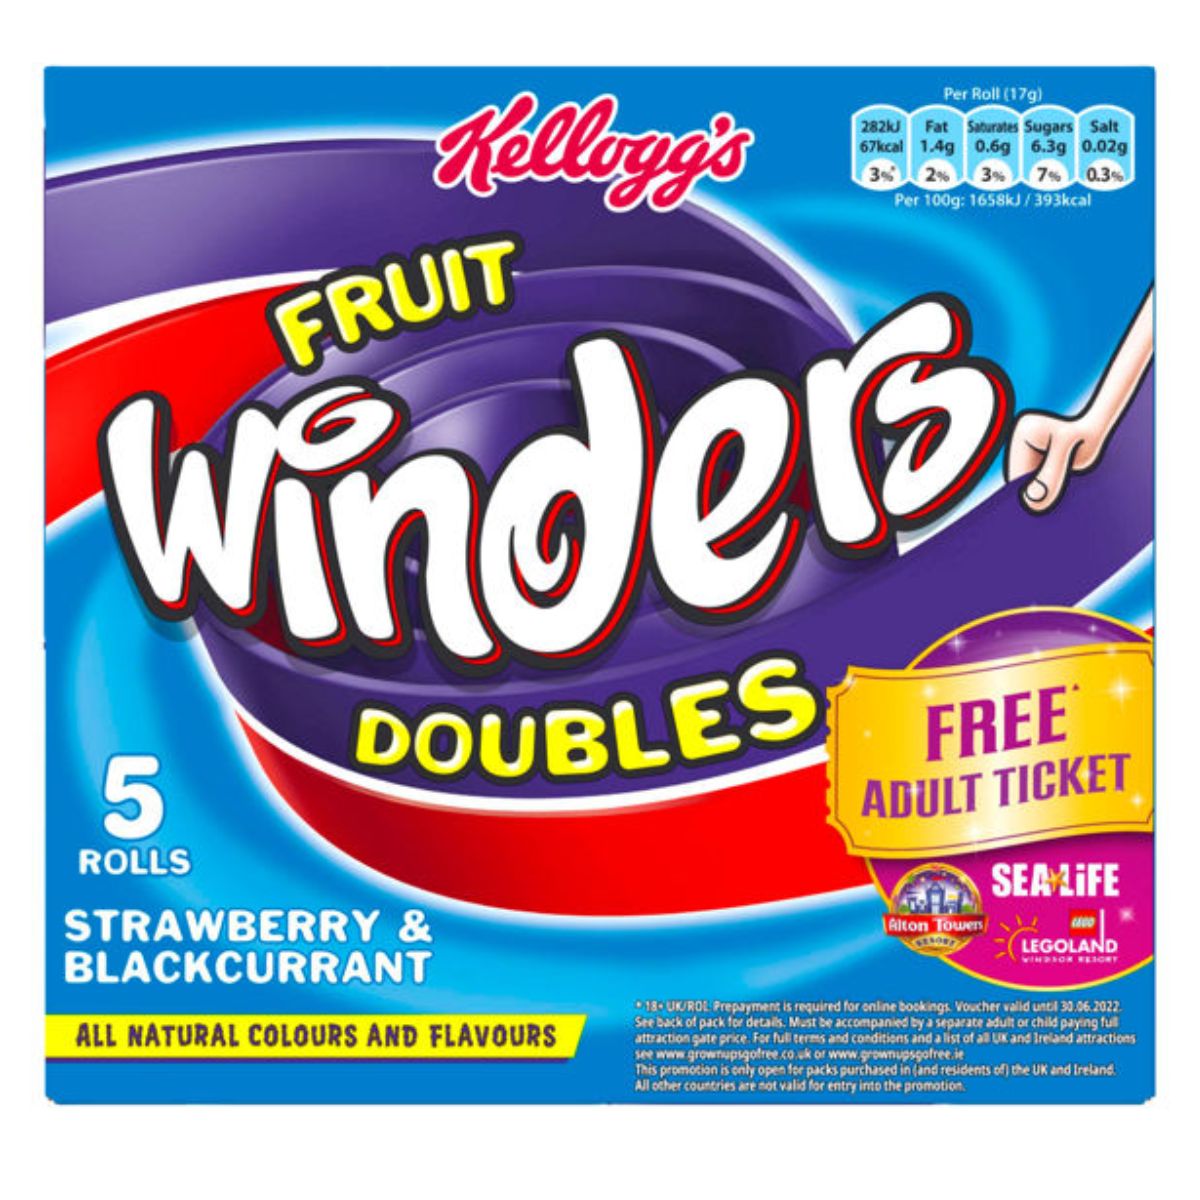 Product packaging for Kelloggs - Fruit Winders Doubles Strawberry & Blackcurrant Rolls - 5 x 17g, displaying nutritional information and a free ticket offer.